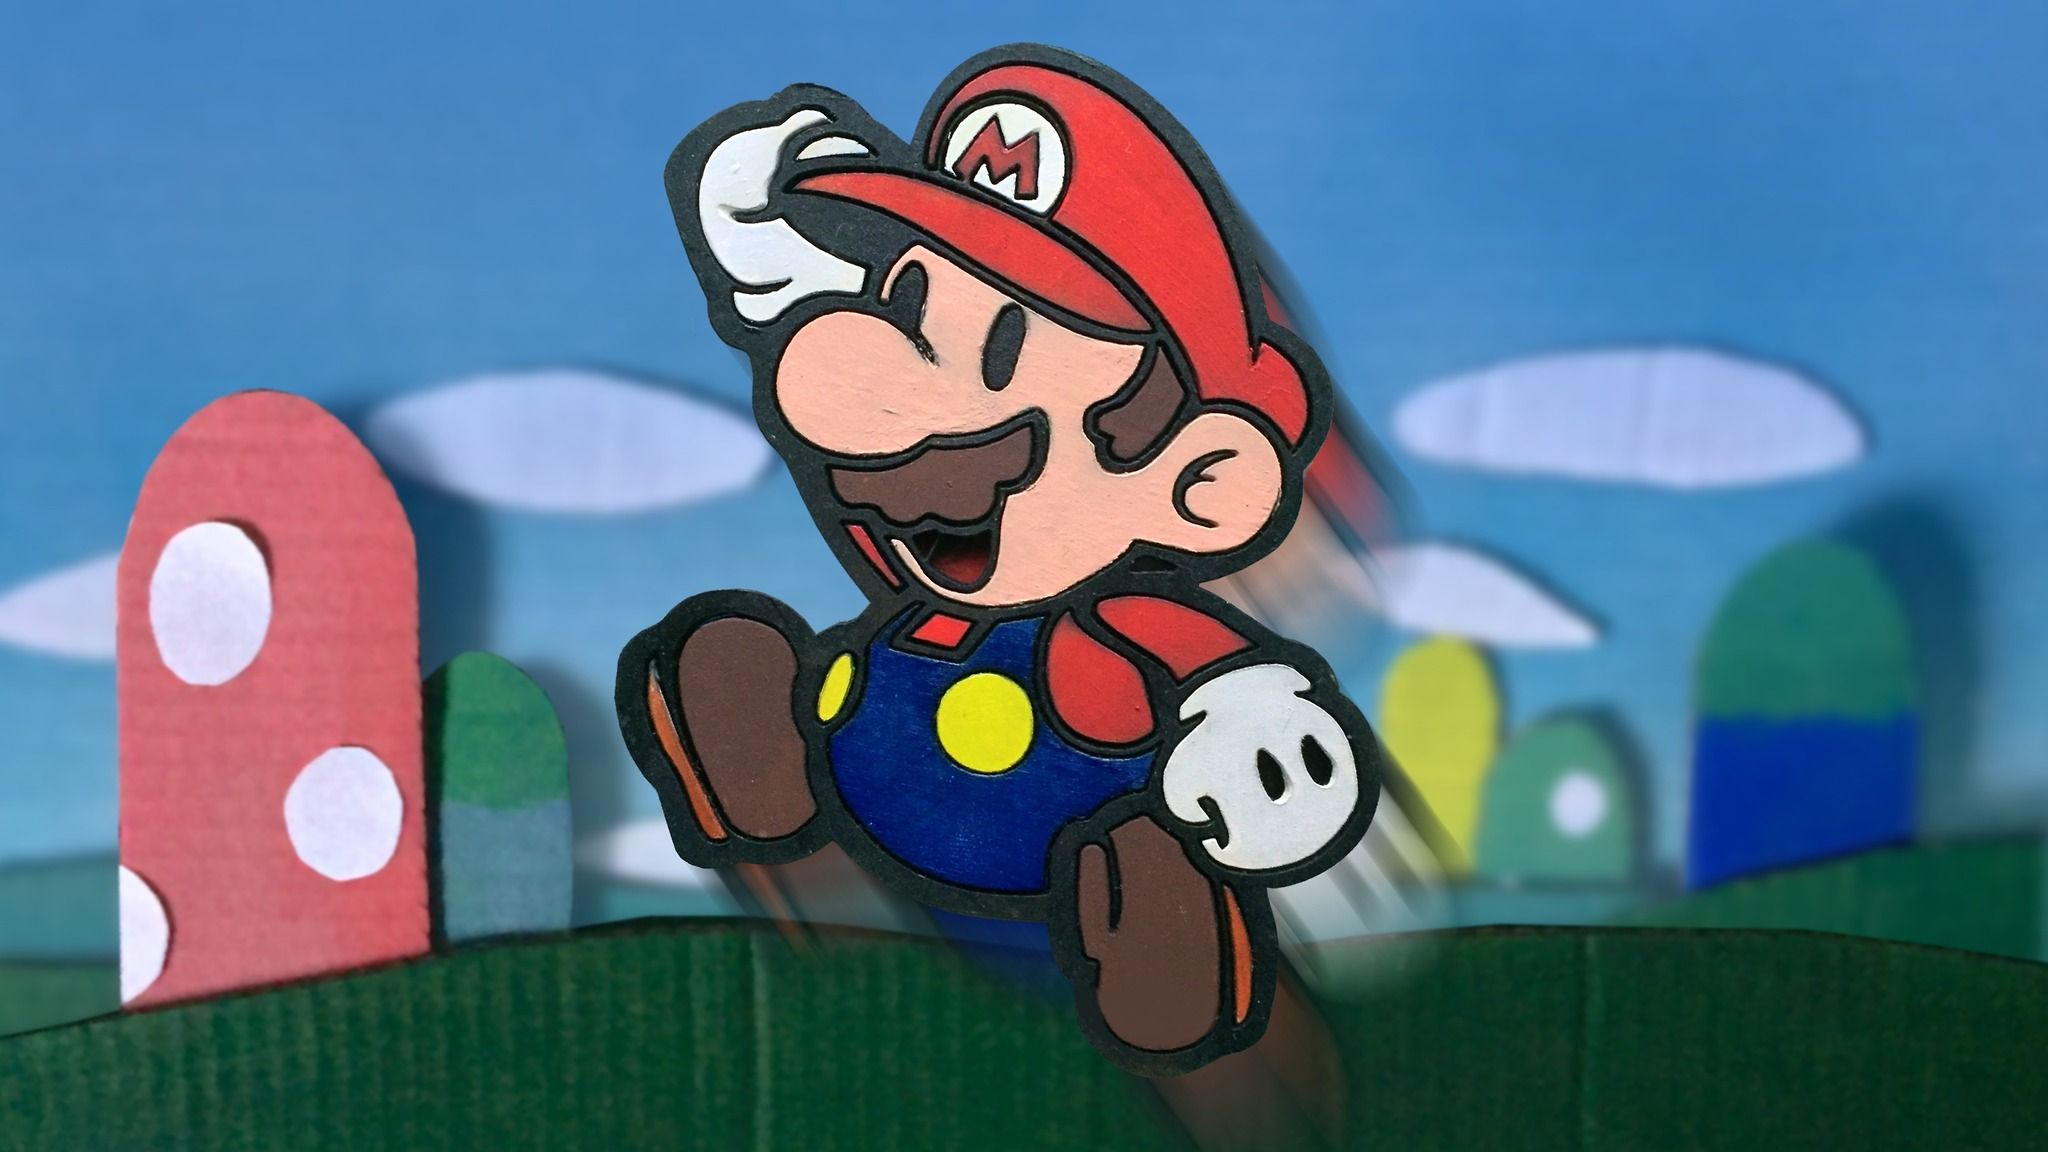 A paper Mario figure standing in front of a paper mushroom and a paper pipe. - Super Mario